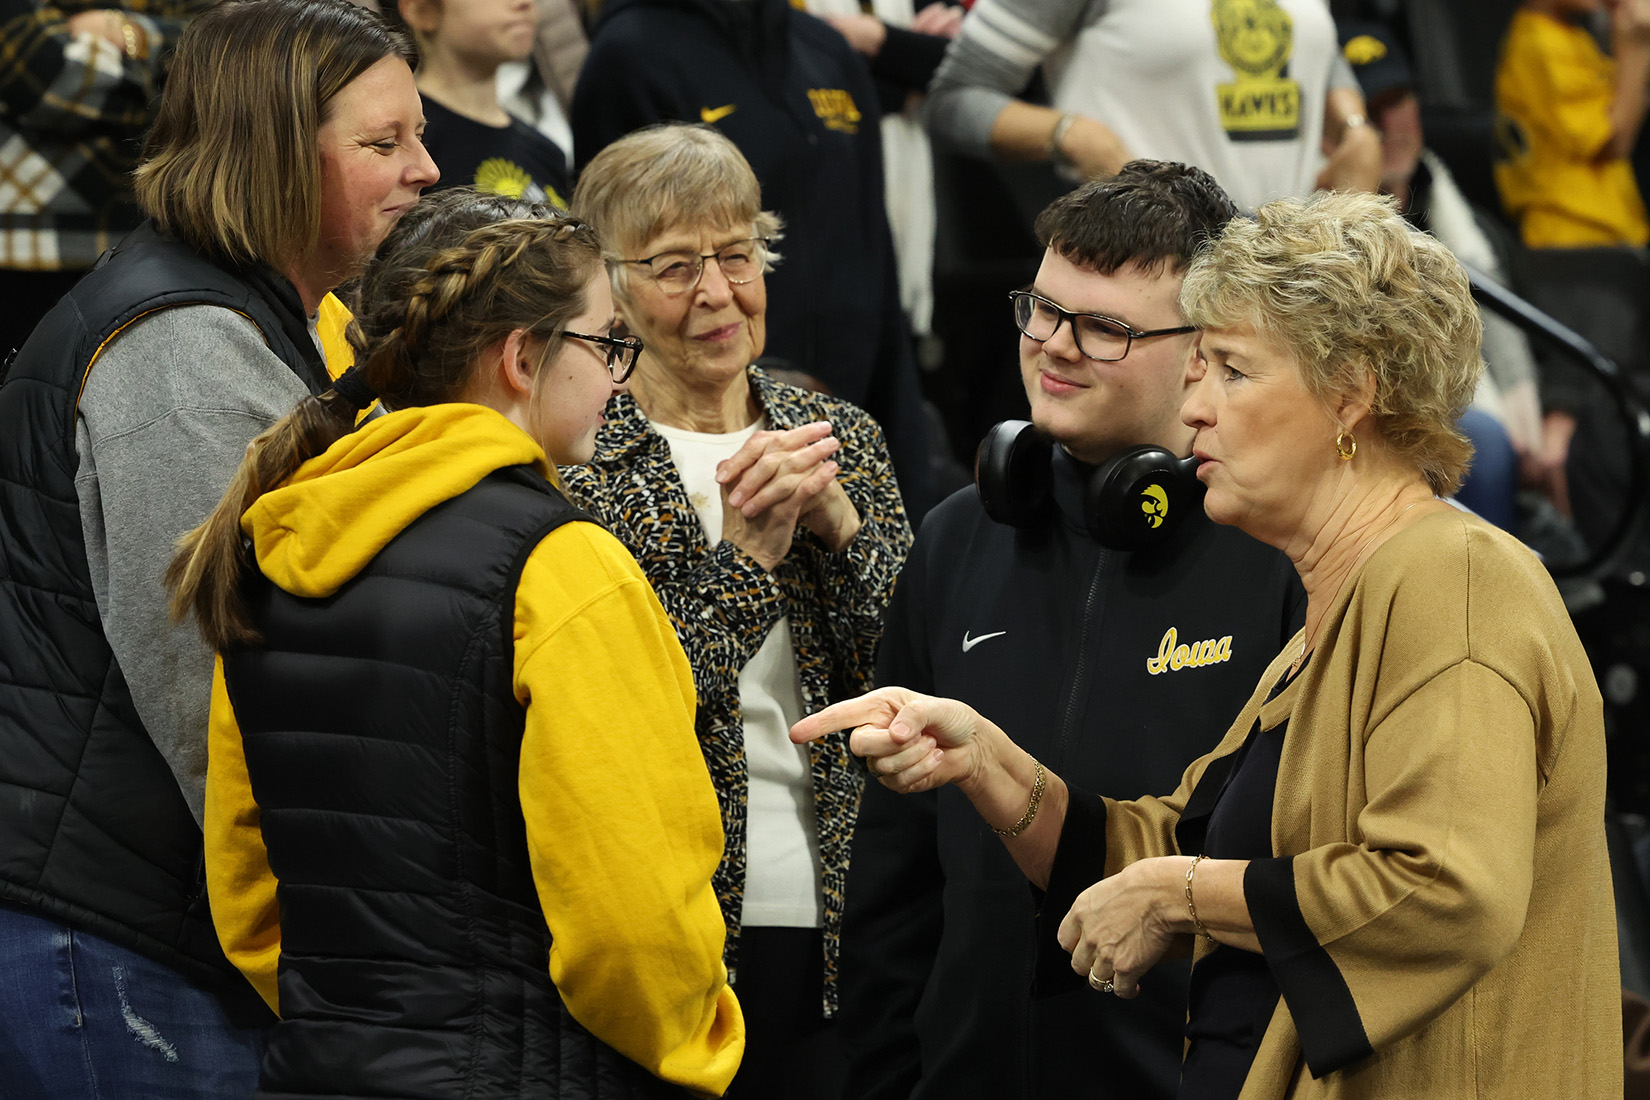 Cooper Reaves and Lisa Bluder visit with others at Carver-Hawkeye Arena